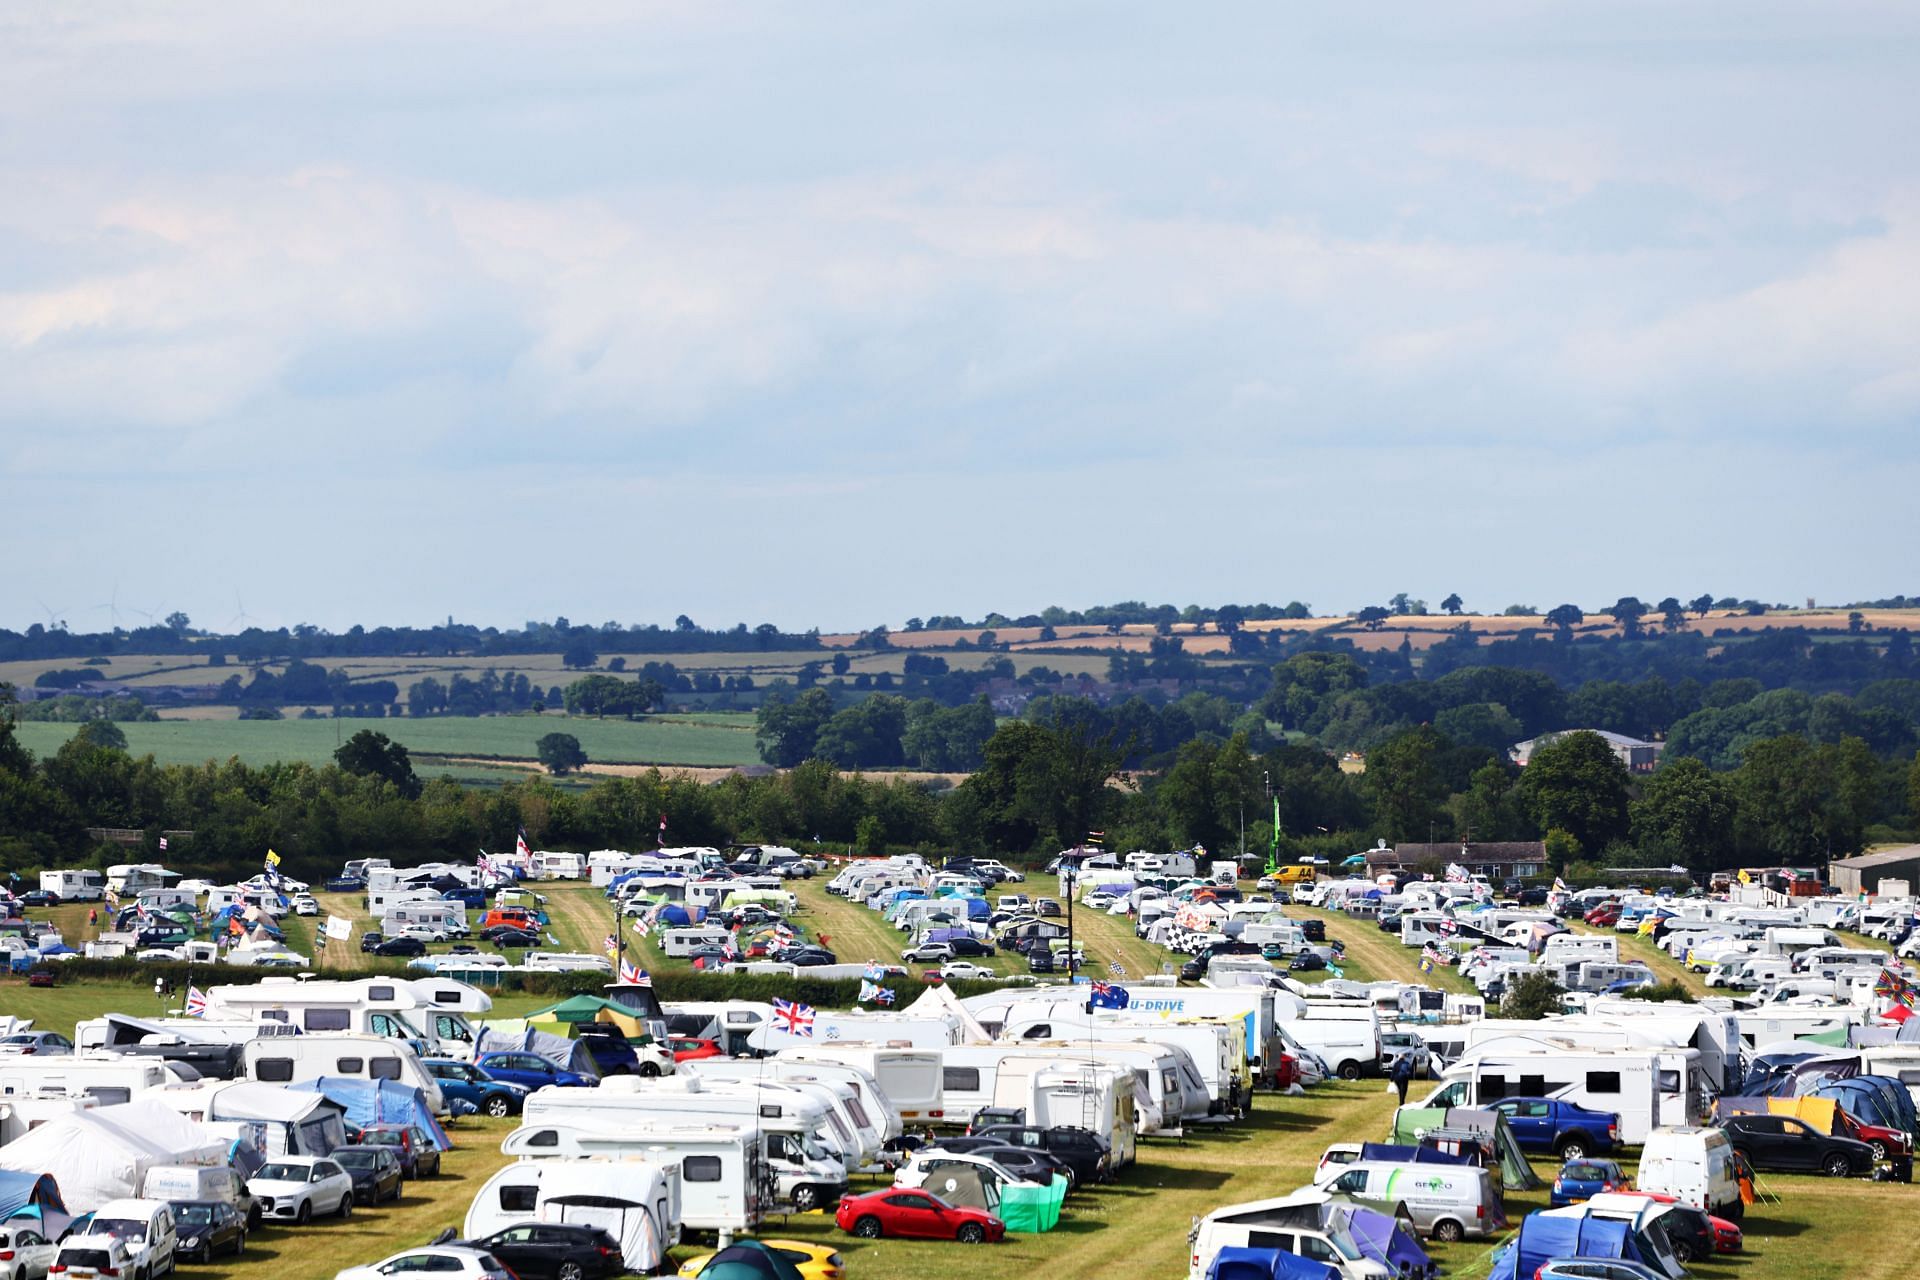 A general view over the campsite during the British GP at Silverstone (Photo by Clive Rose/ Getty Images)